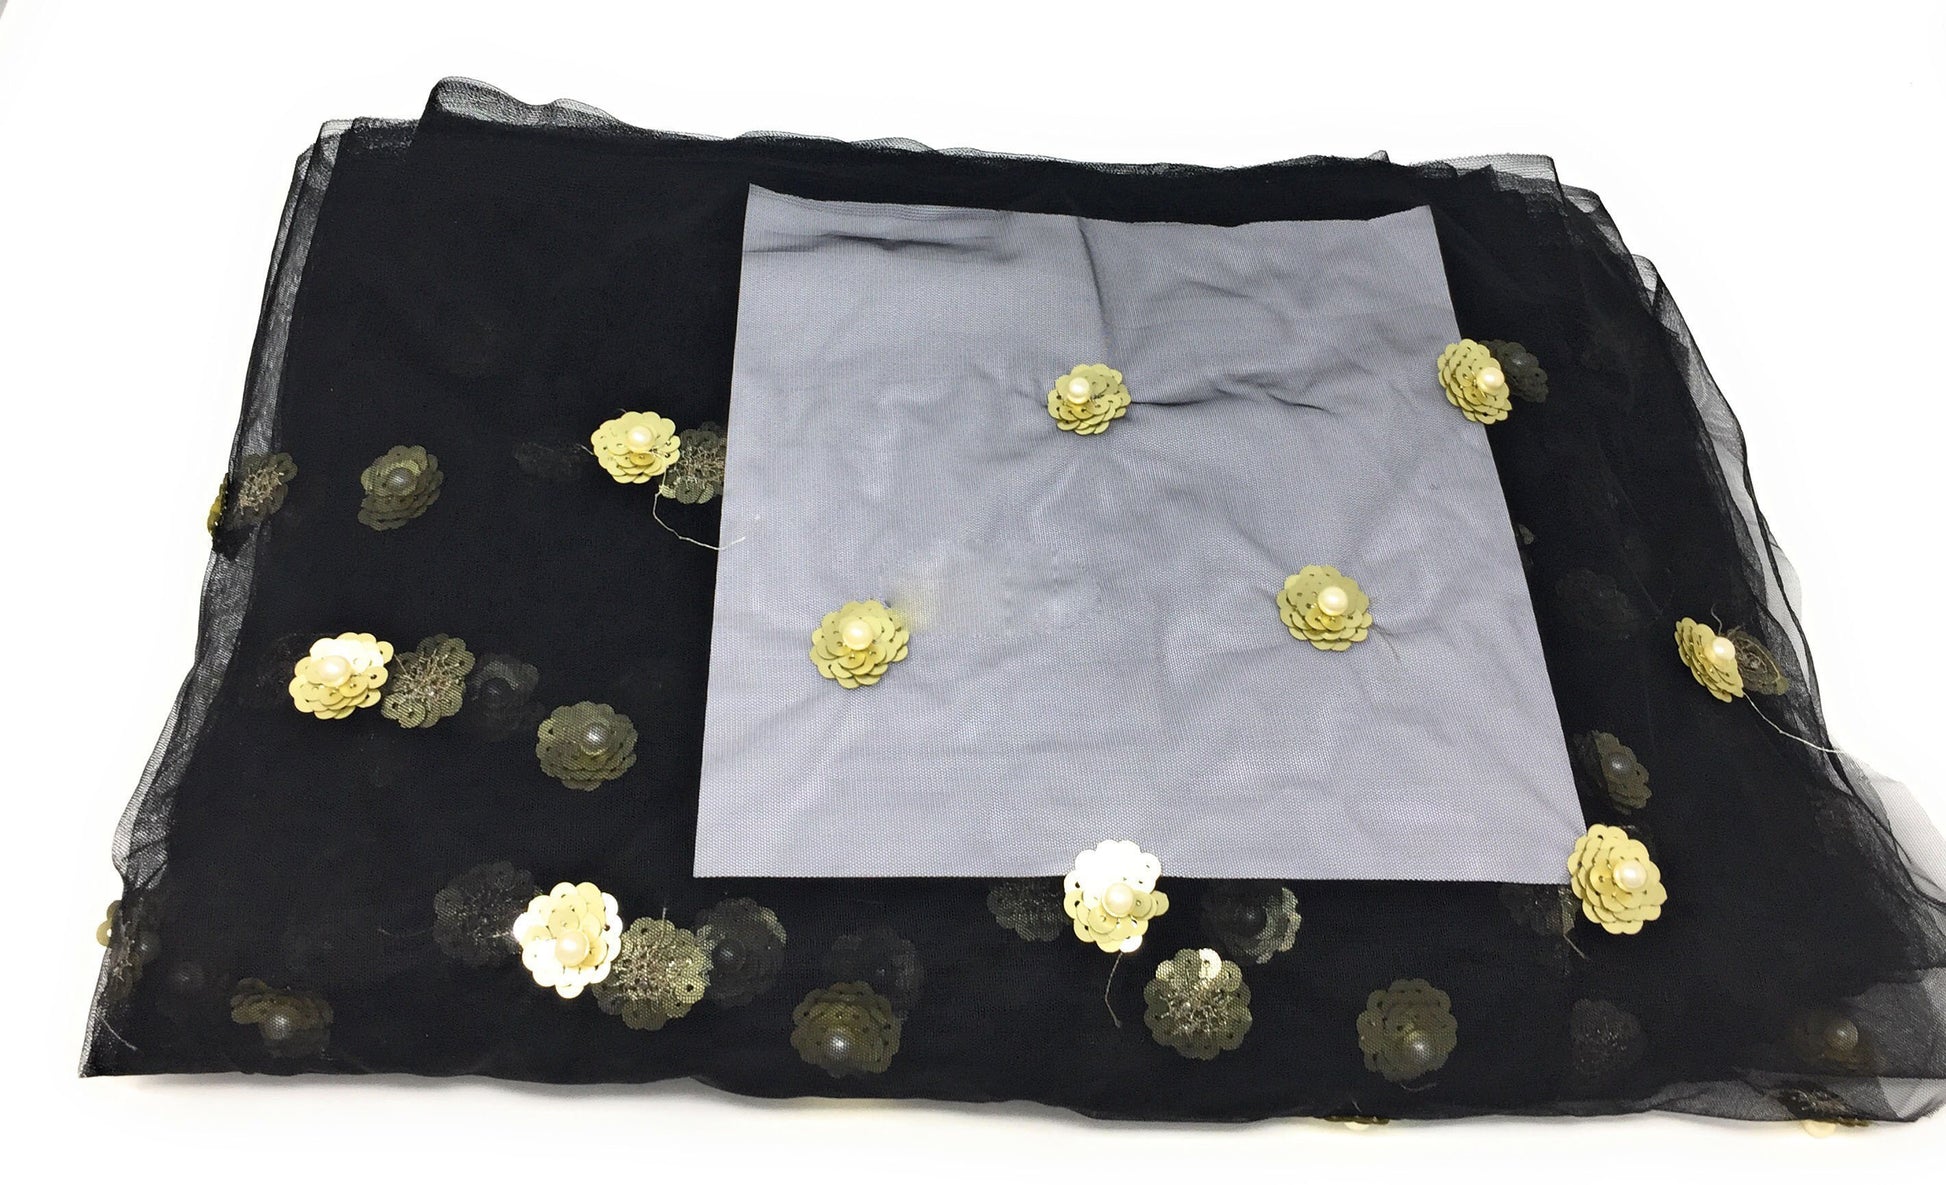 Embroidered Floral cloth